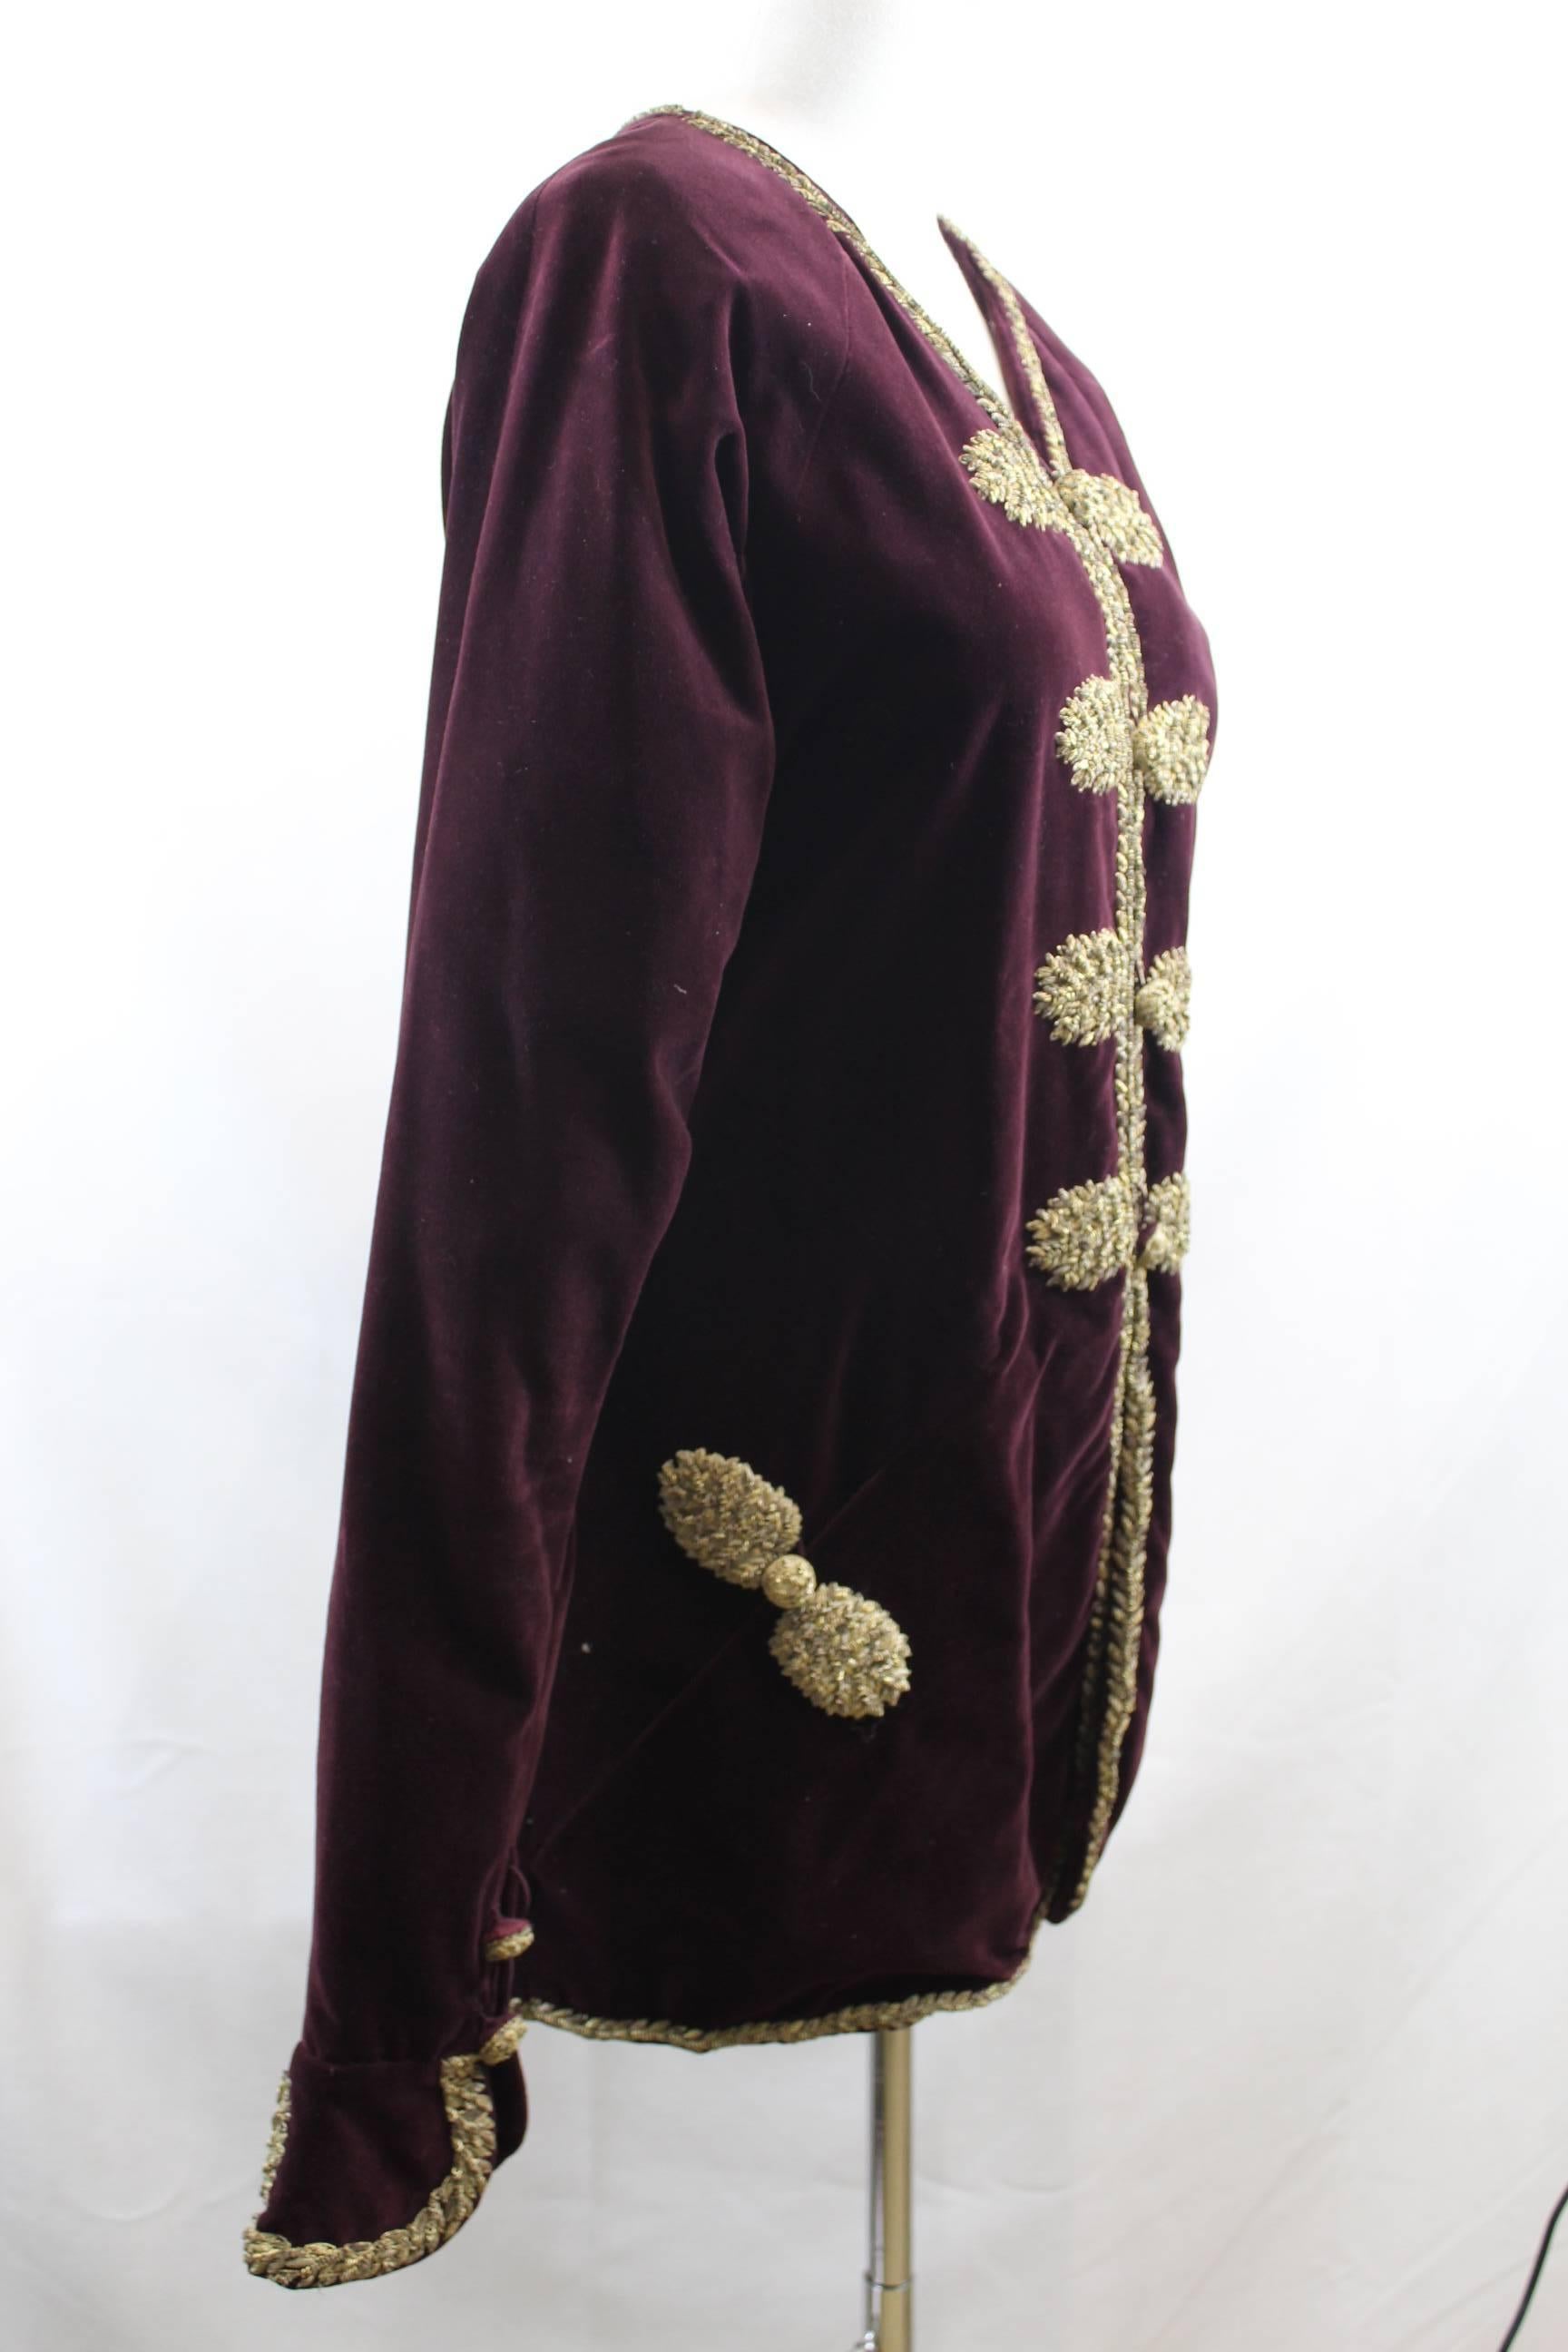 Vintage Karl Lagerfeld acket in purple velvet with a really nice work of embroidery in the chest and sleeves.

Sleeves quite narrow.

European S size.

Good condition but some minor signs of wear.